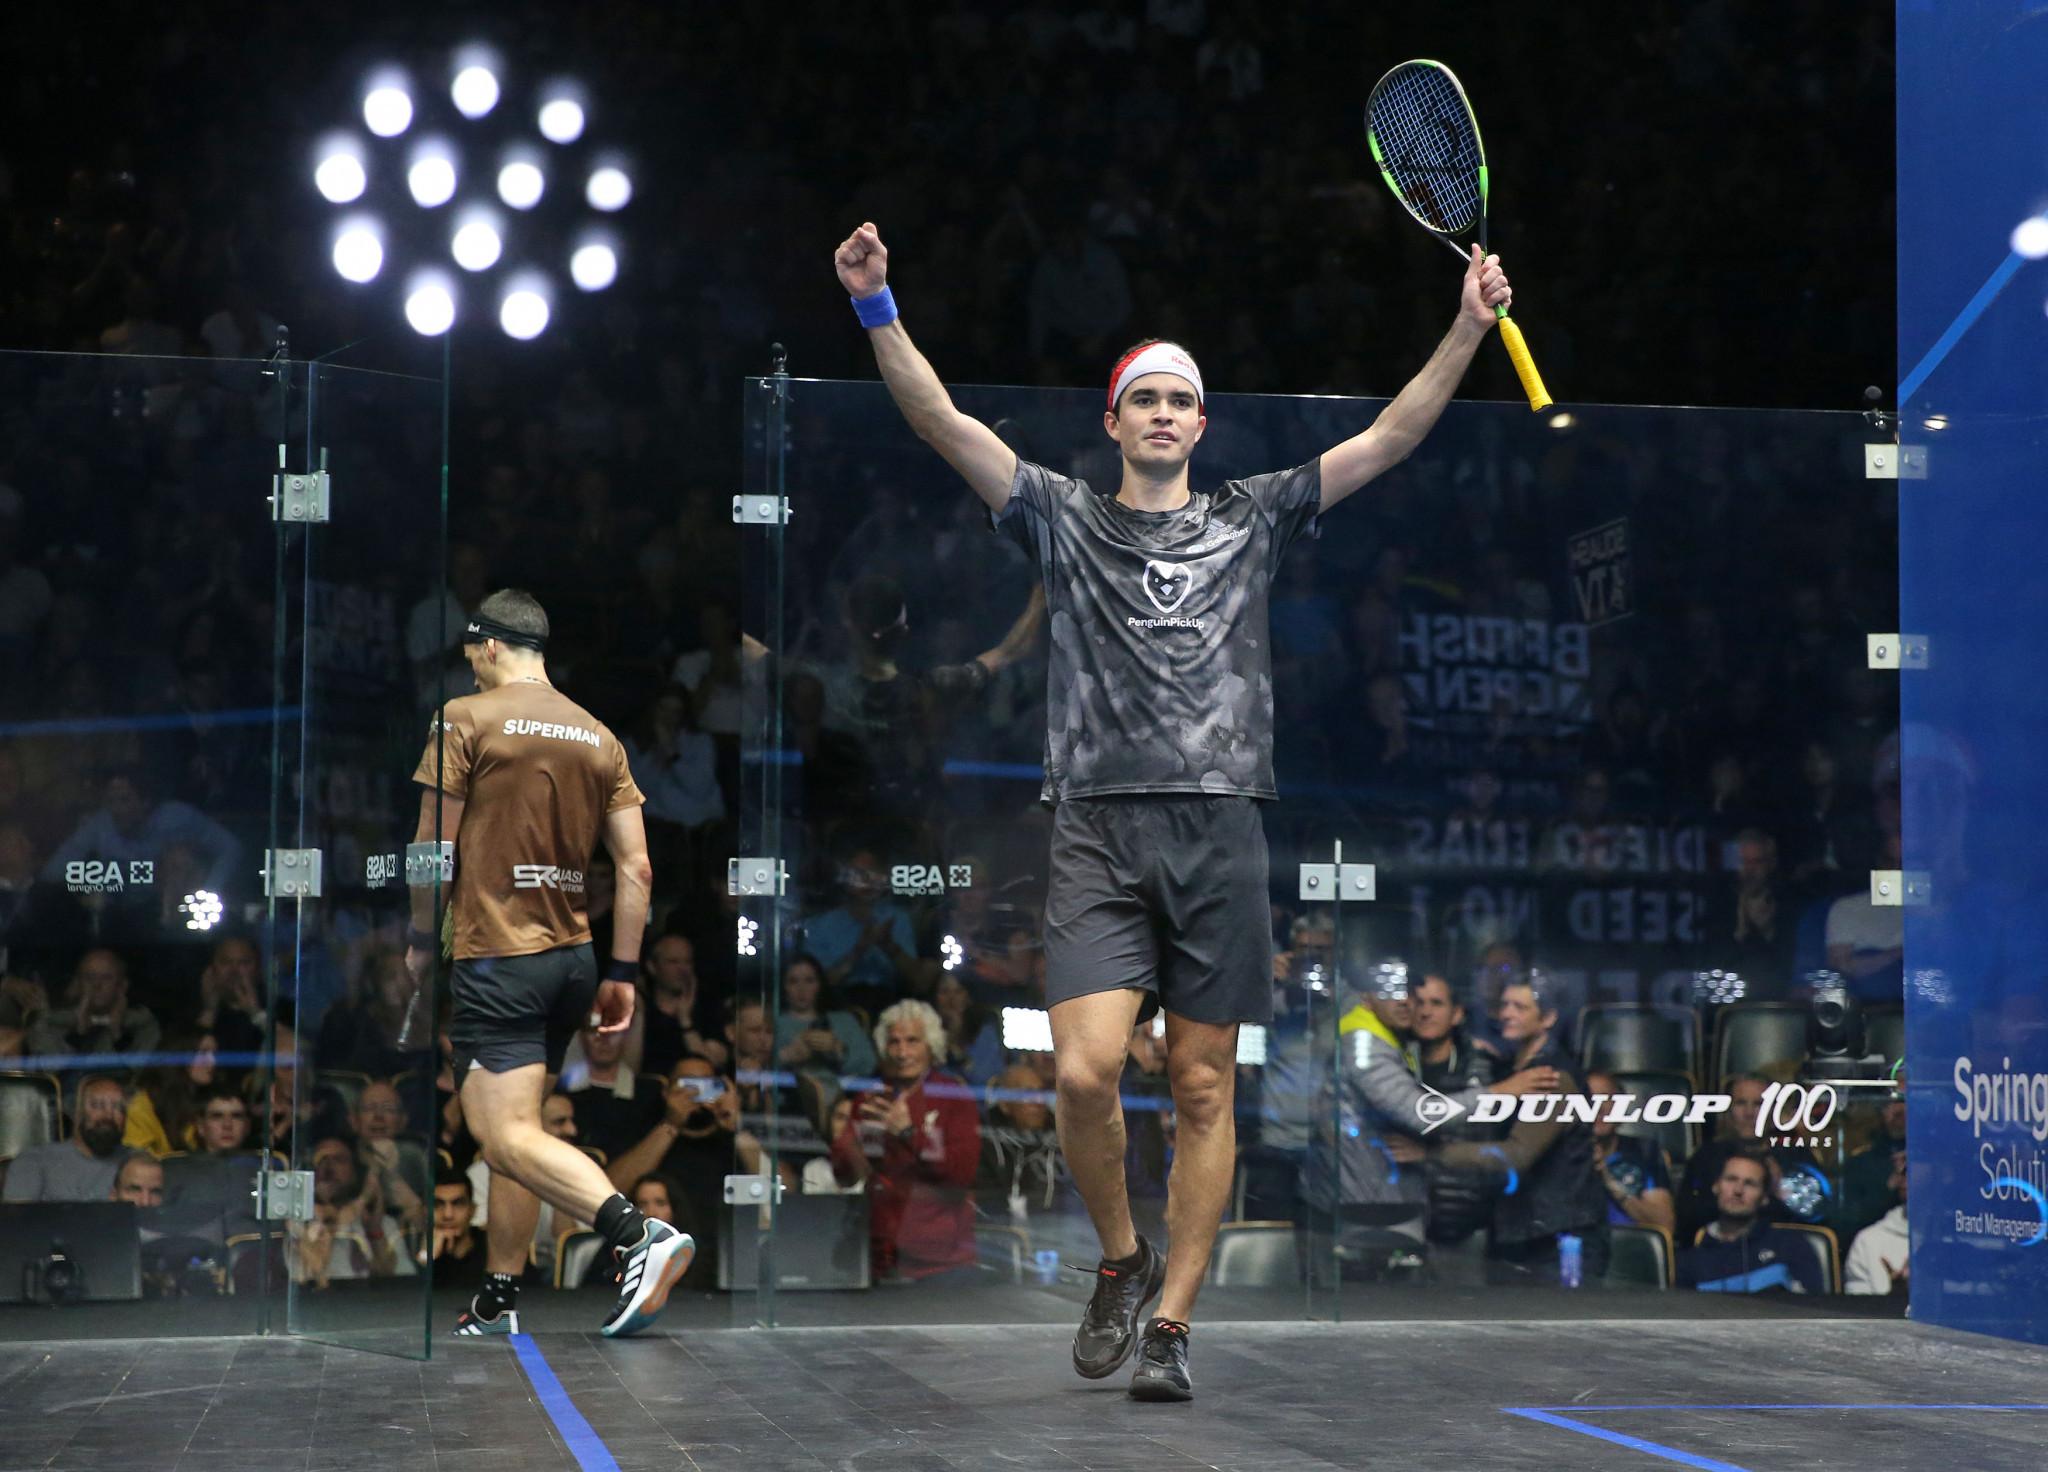 Elias becomes first South American world number one squash player 